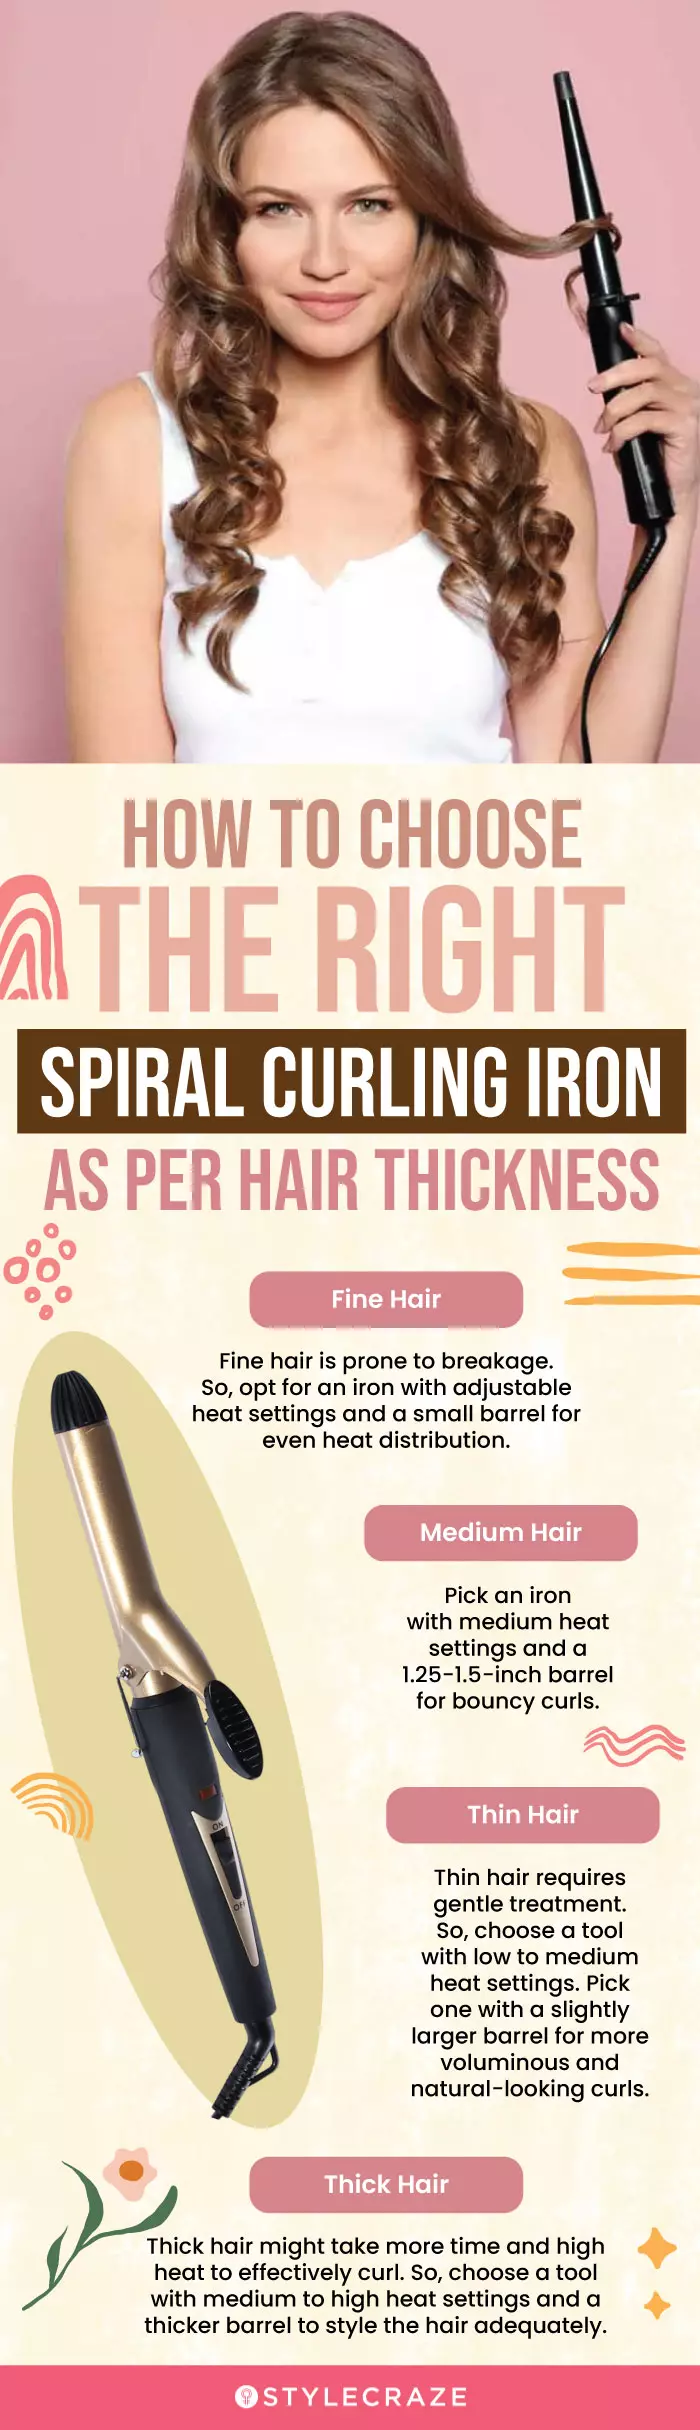 How To Choose The Right Spiral Curling Iron (infographic)